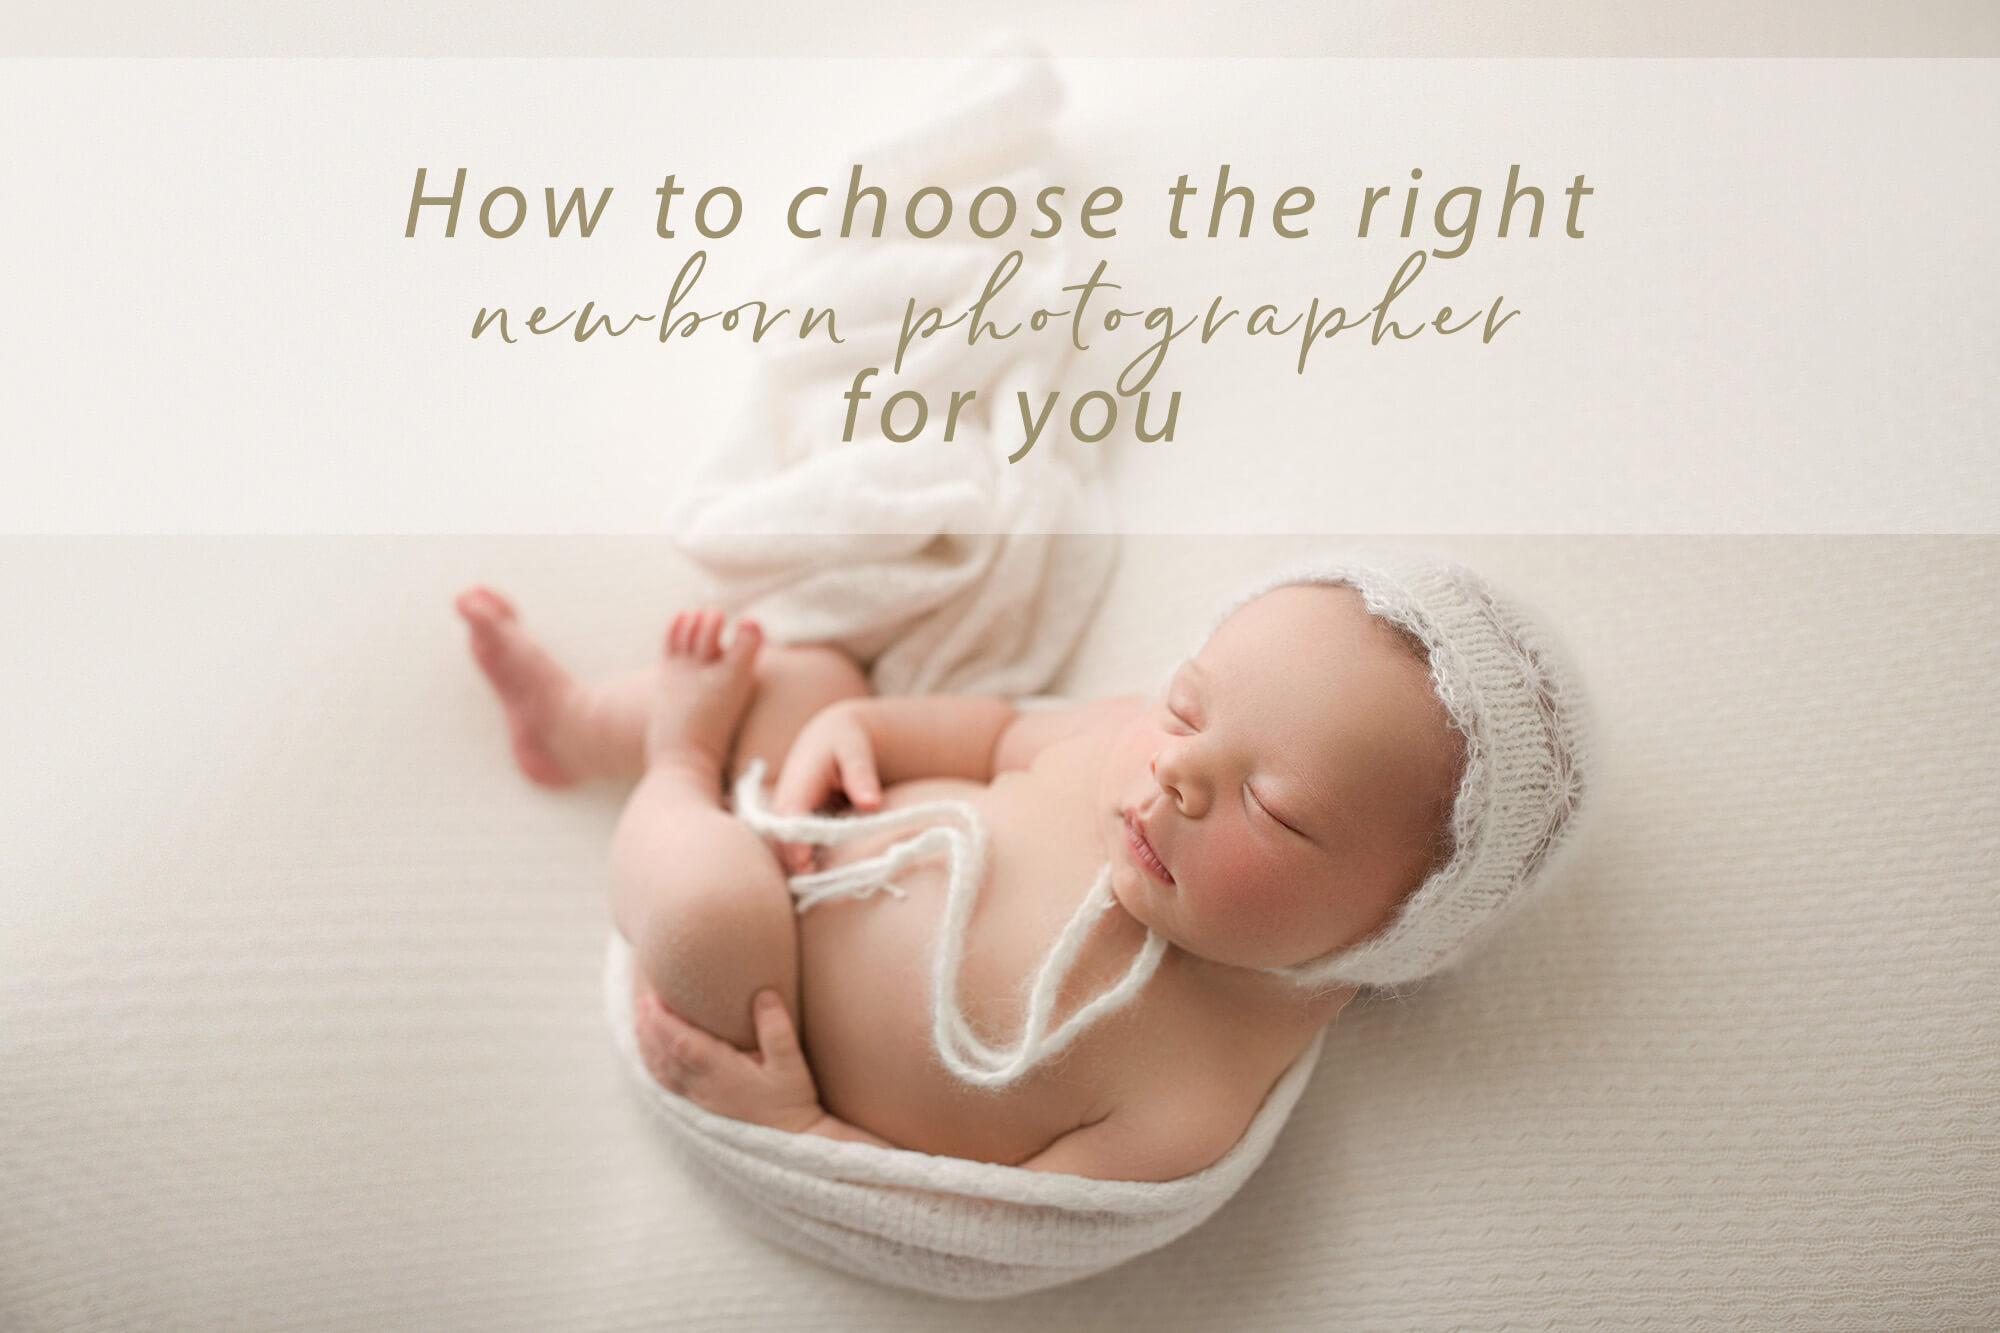 How to choose a photographer for newborn photography 1